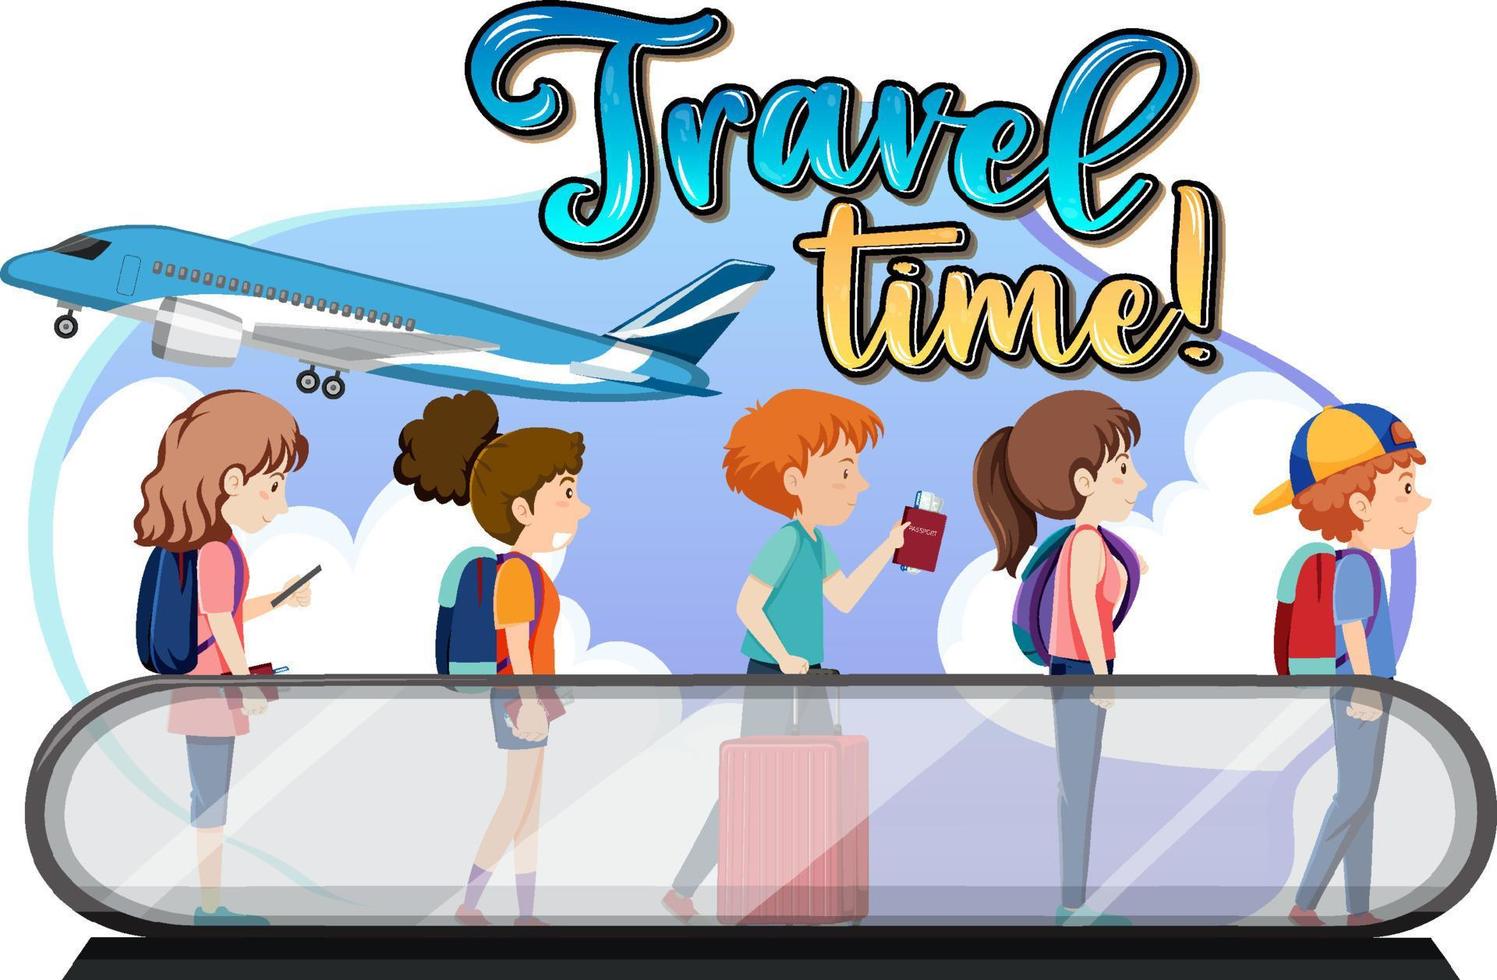 Travel Time typography logo with passengers on moving walkway vector